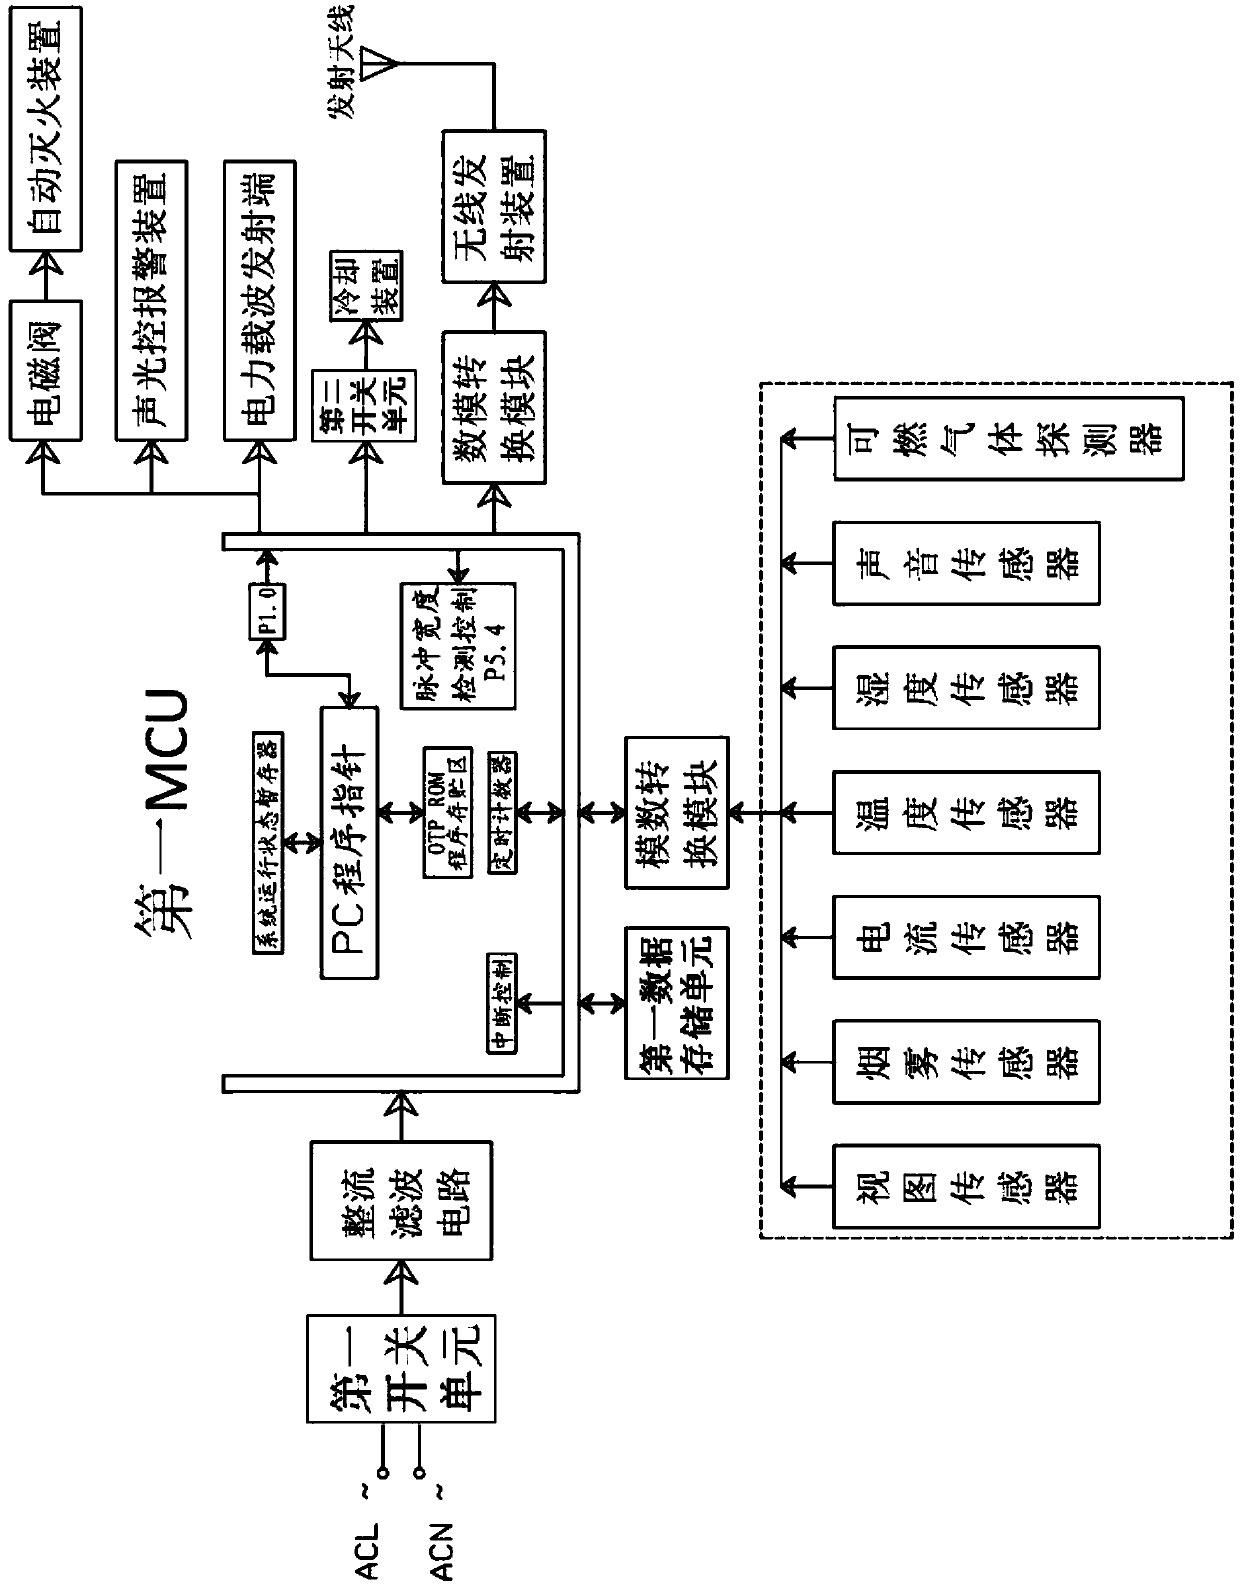 Charging device security intelligence control system